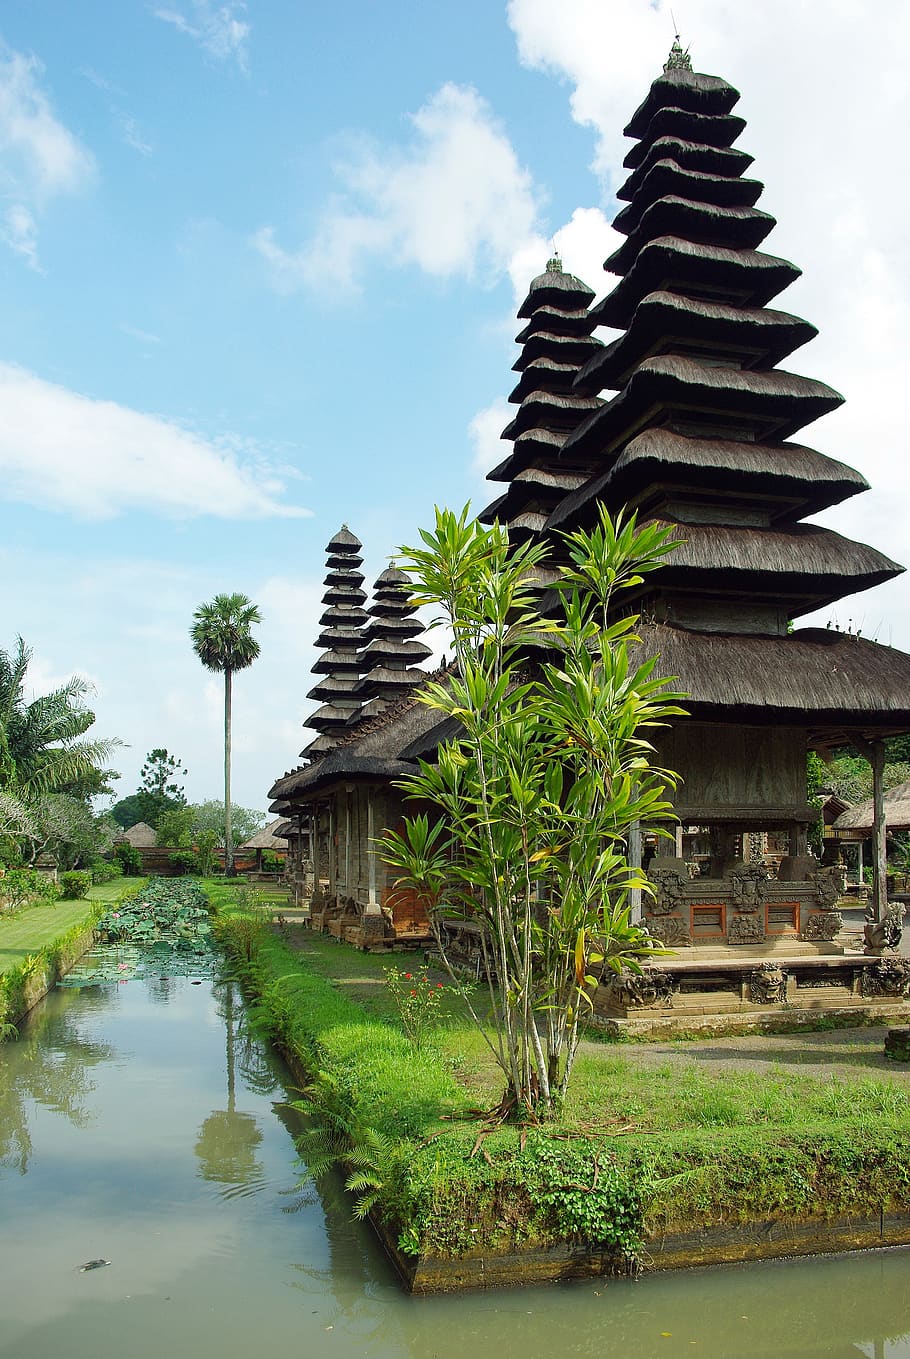 Pura Ulun Bali Live Wallpaper Free Android Live Wallpaper download   Download the Free Pura Ulun Bali Live Wallpaper Live Wallpaper to your  Android phone or tablet